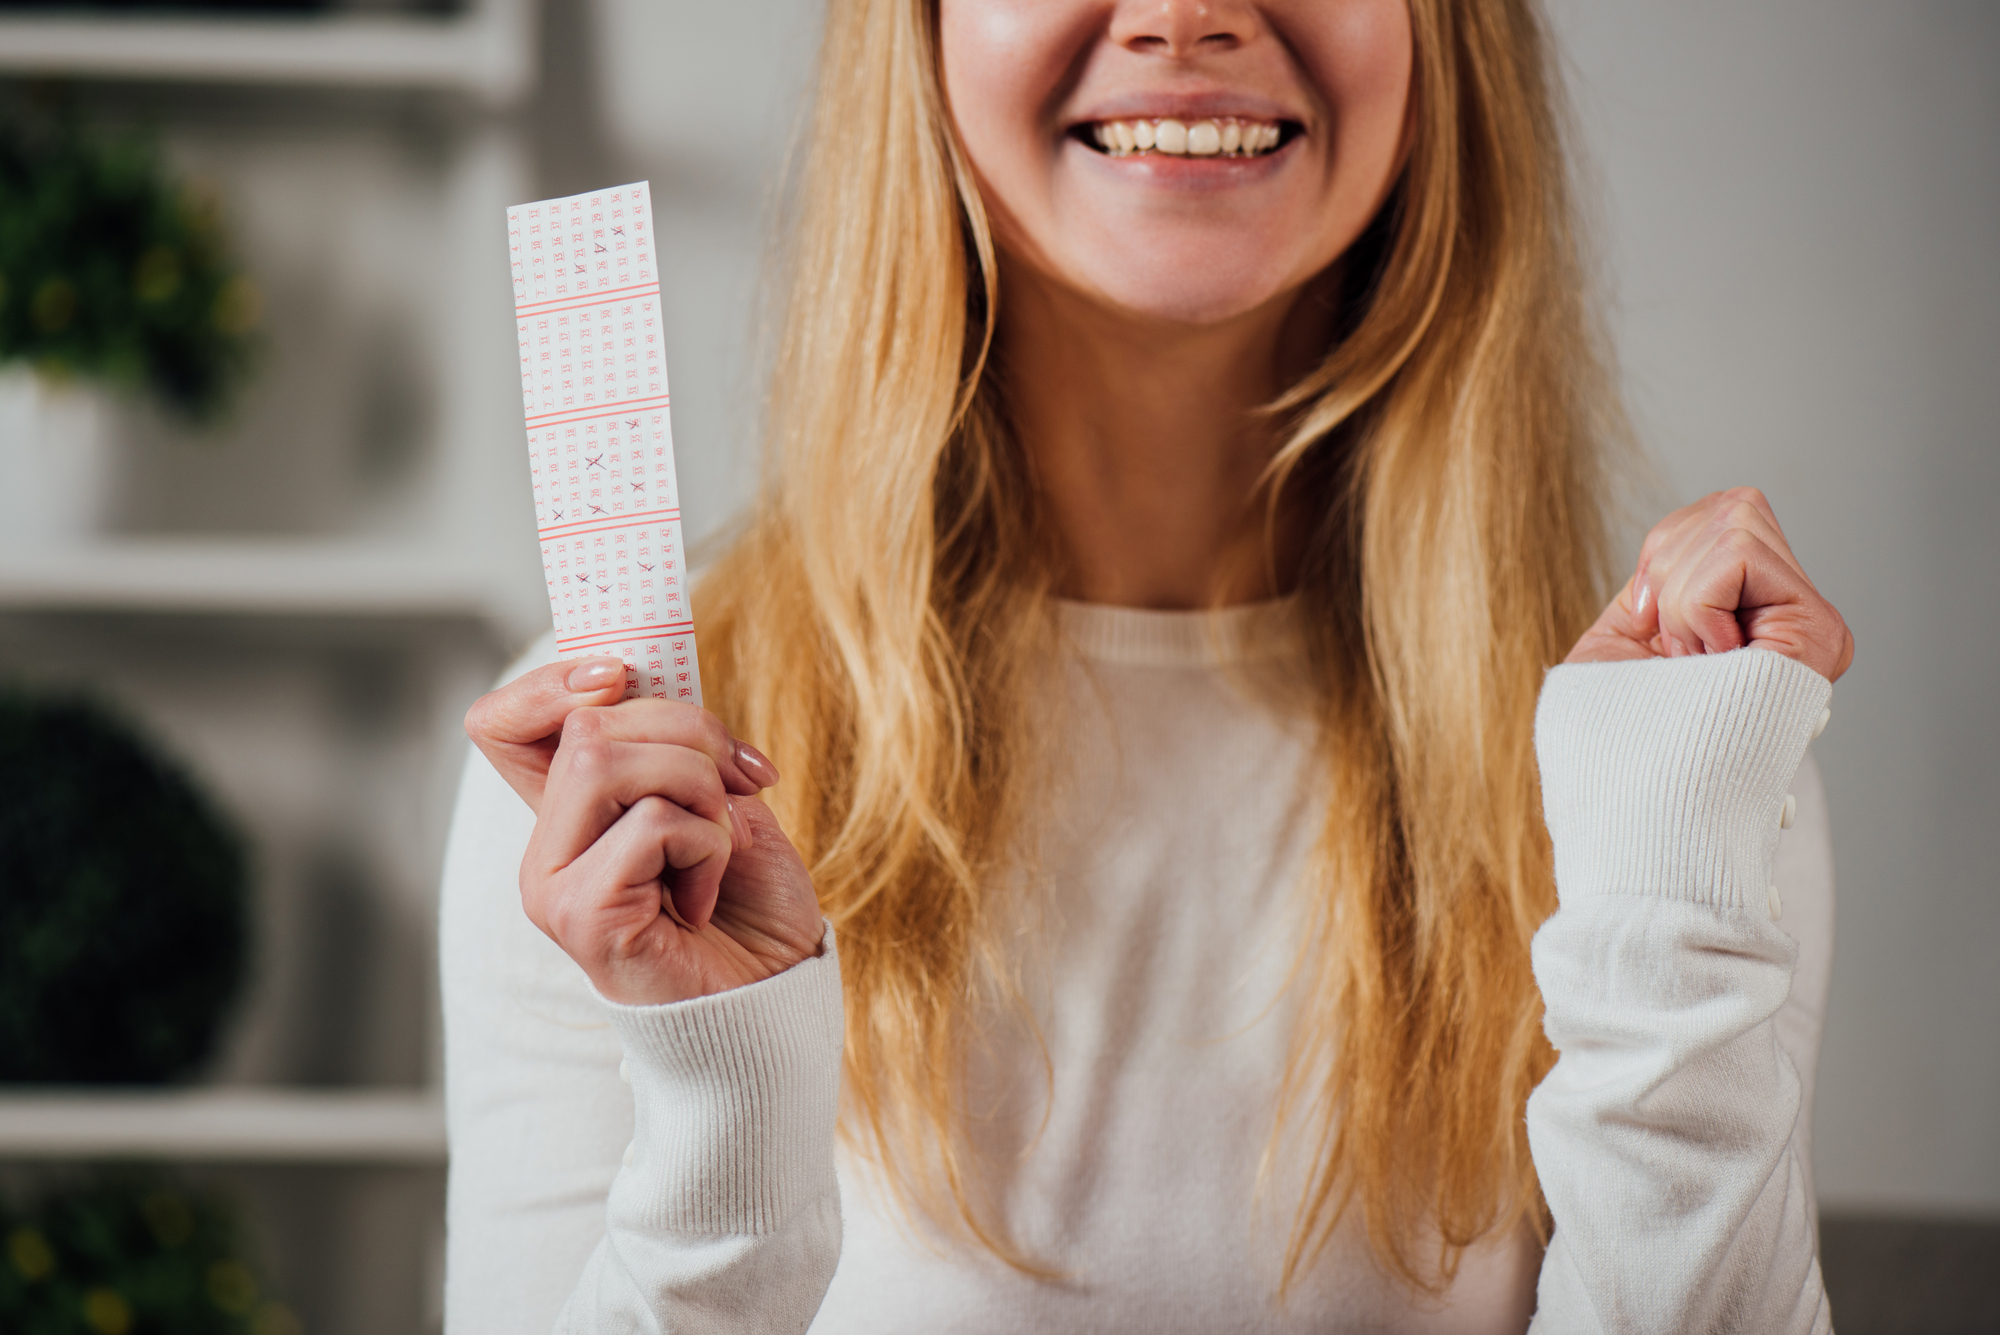 Cropped view of woman showing winner gesture while holding lottery ticket